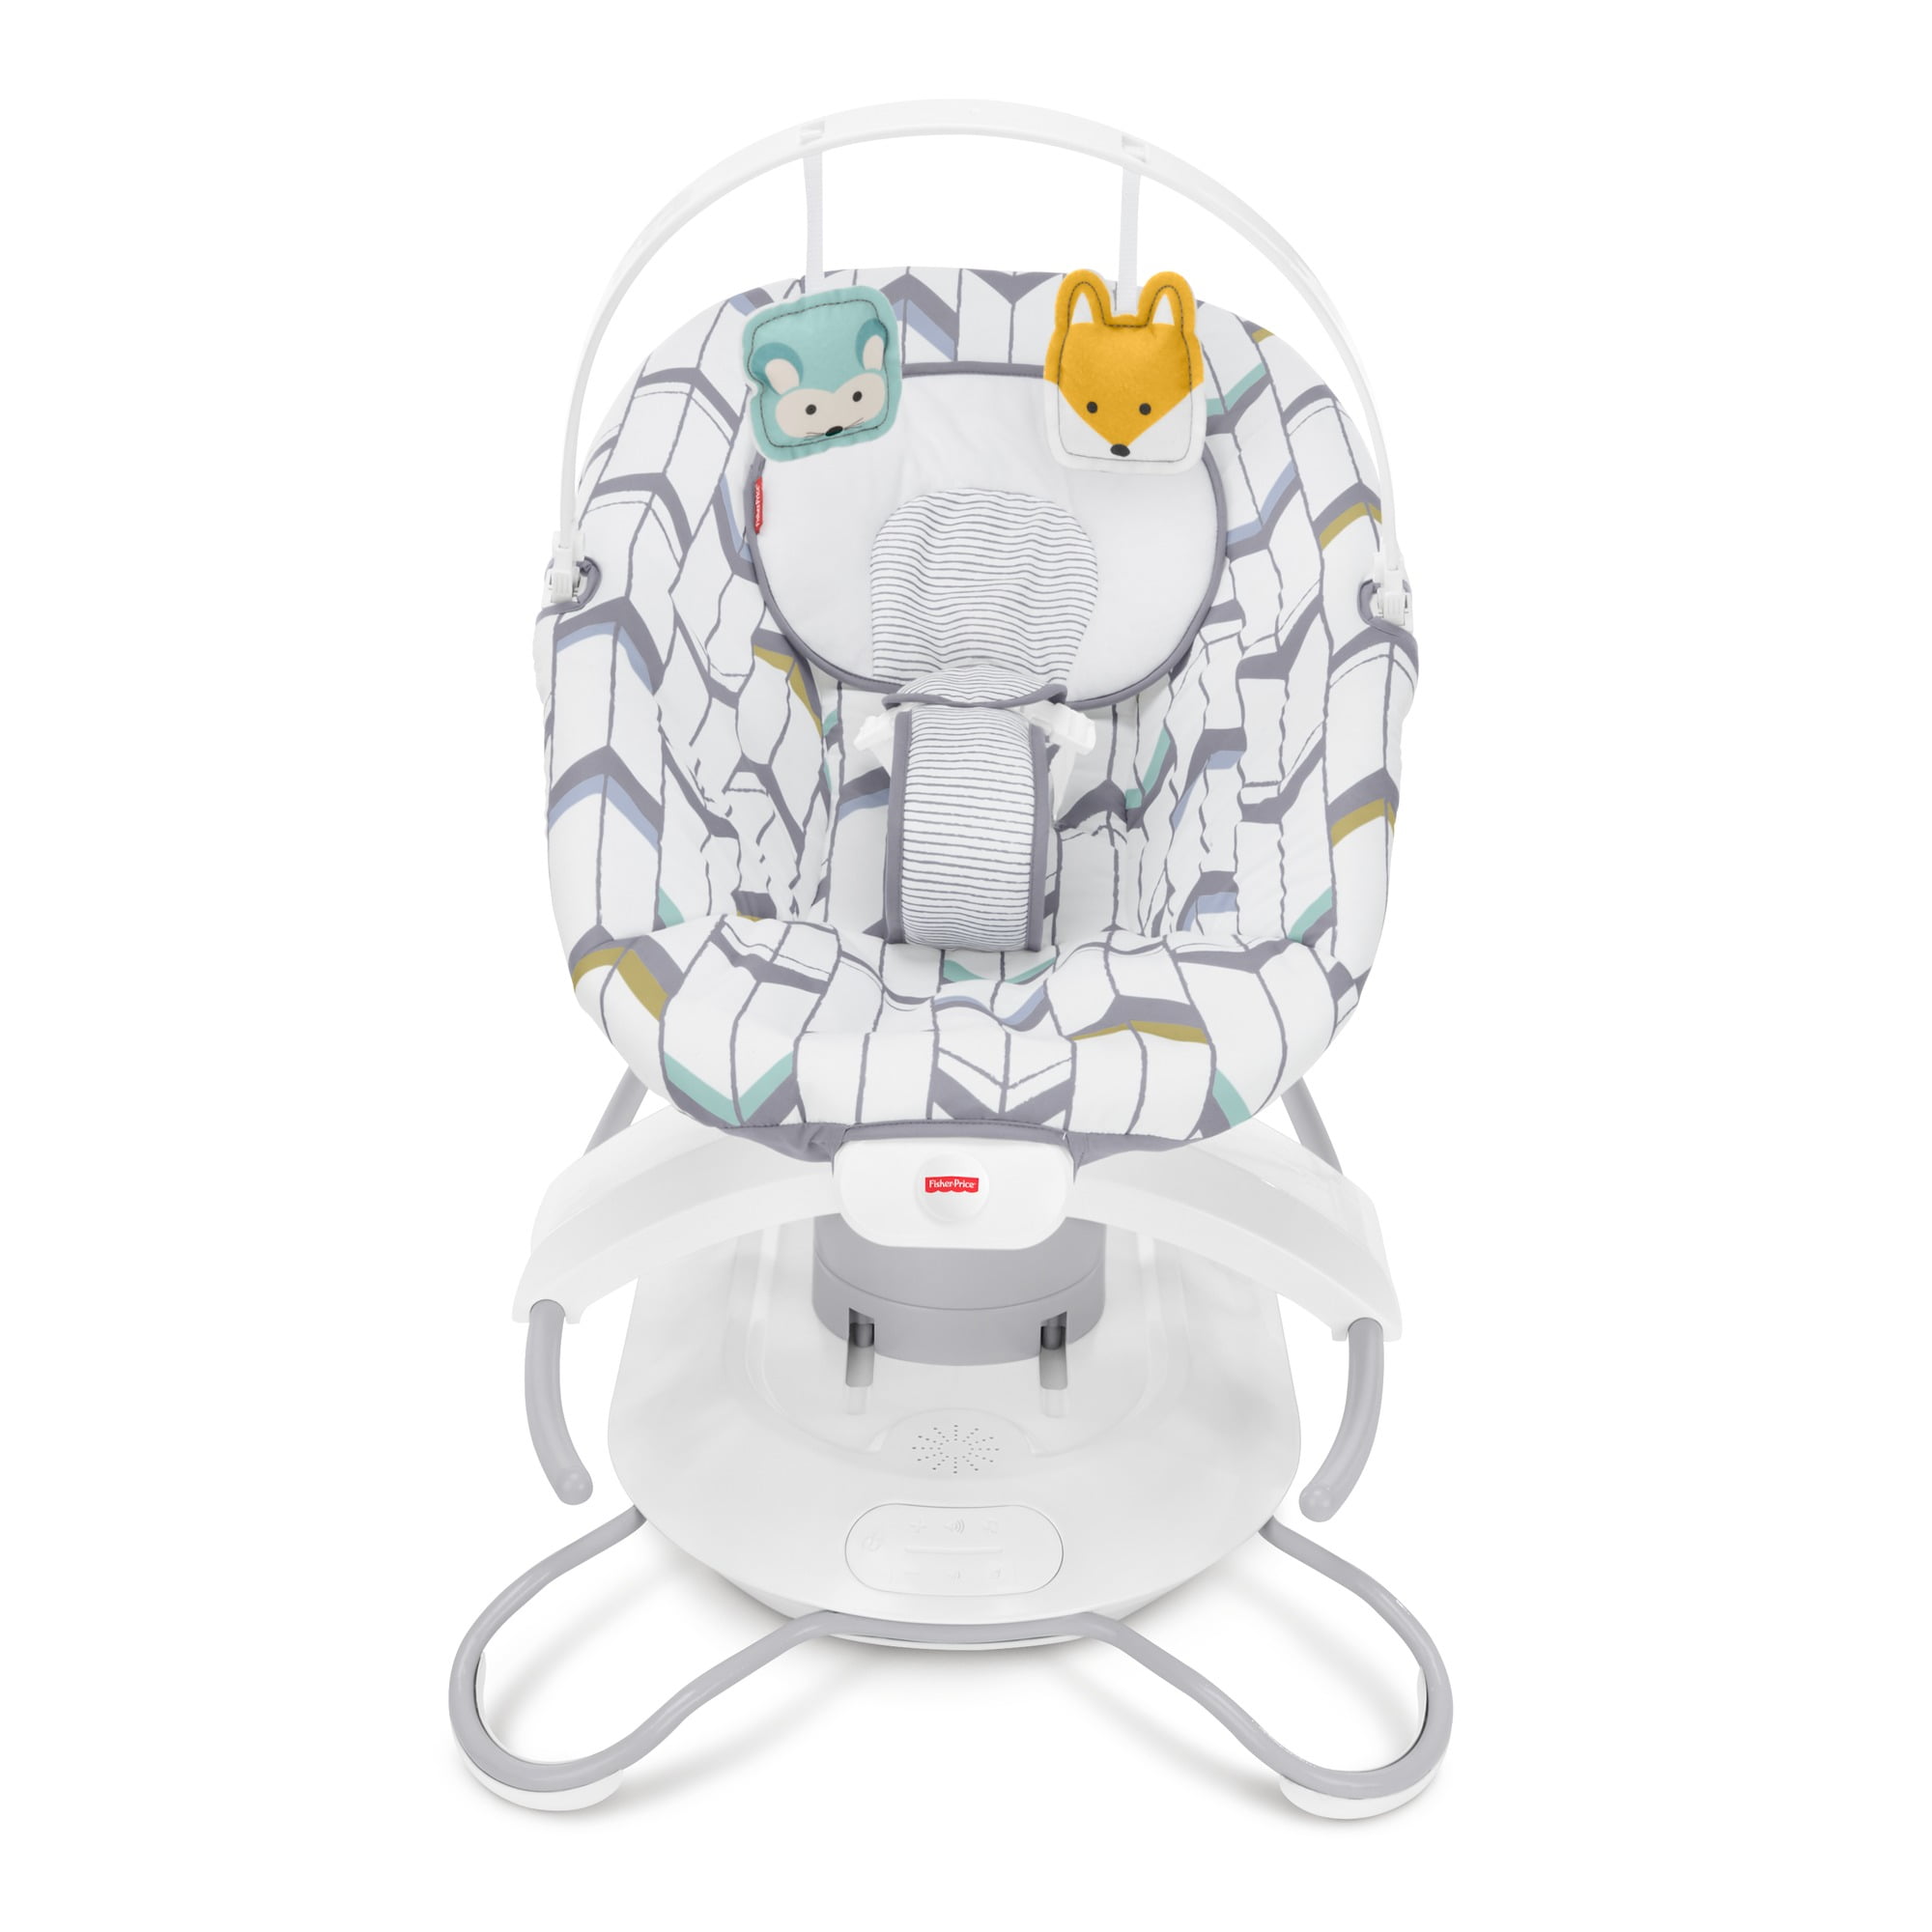 FisherPrice 2in1 Soothe 'n Play Glider with 6Speeds